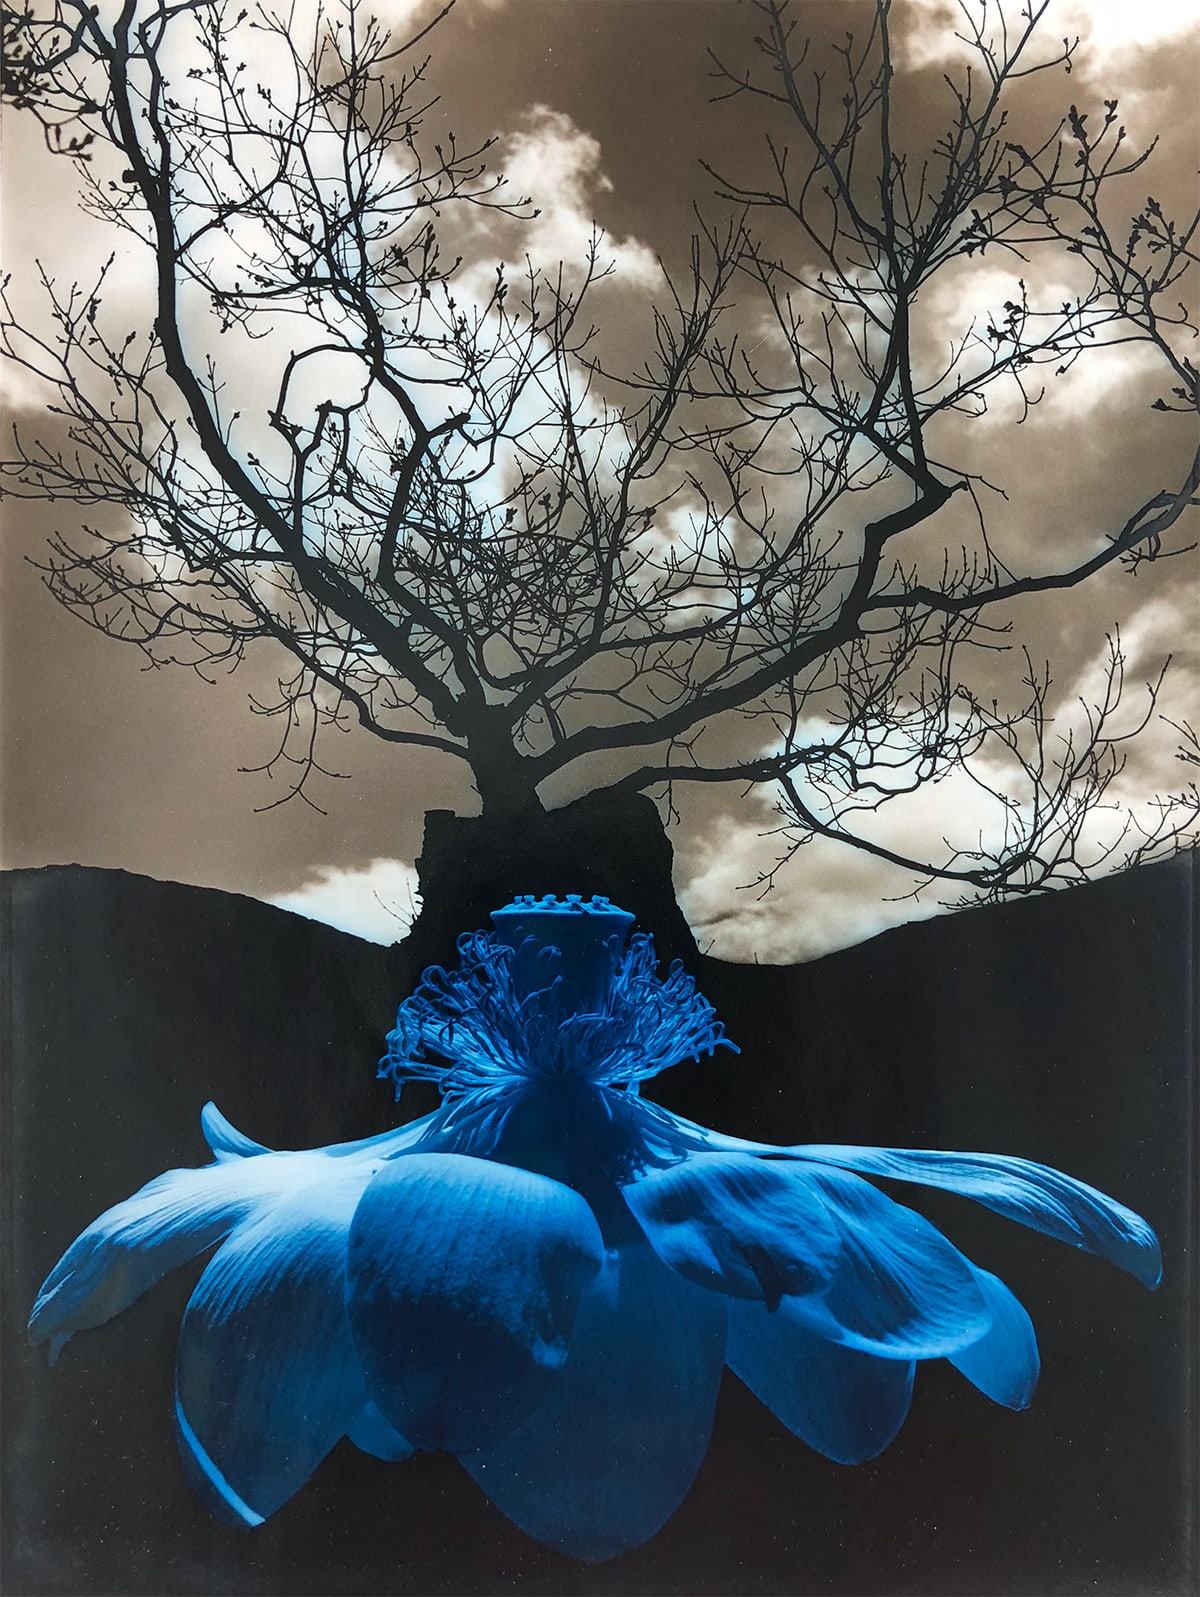 Jerry Uelsmann, Untitled, 1968 (Blue Lotus and Bare Tree), 1968